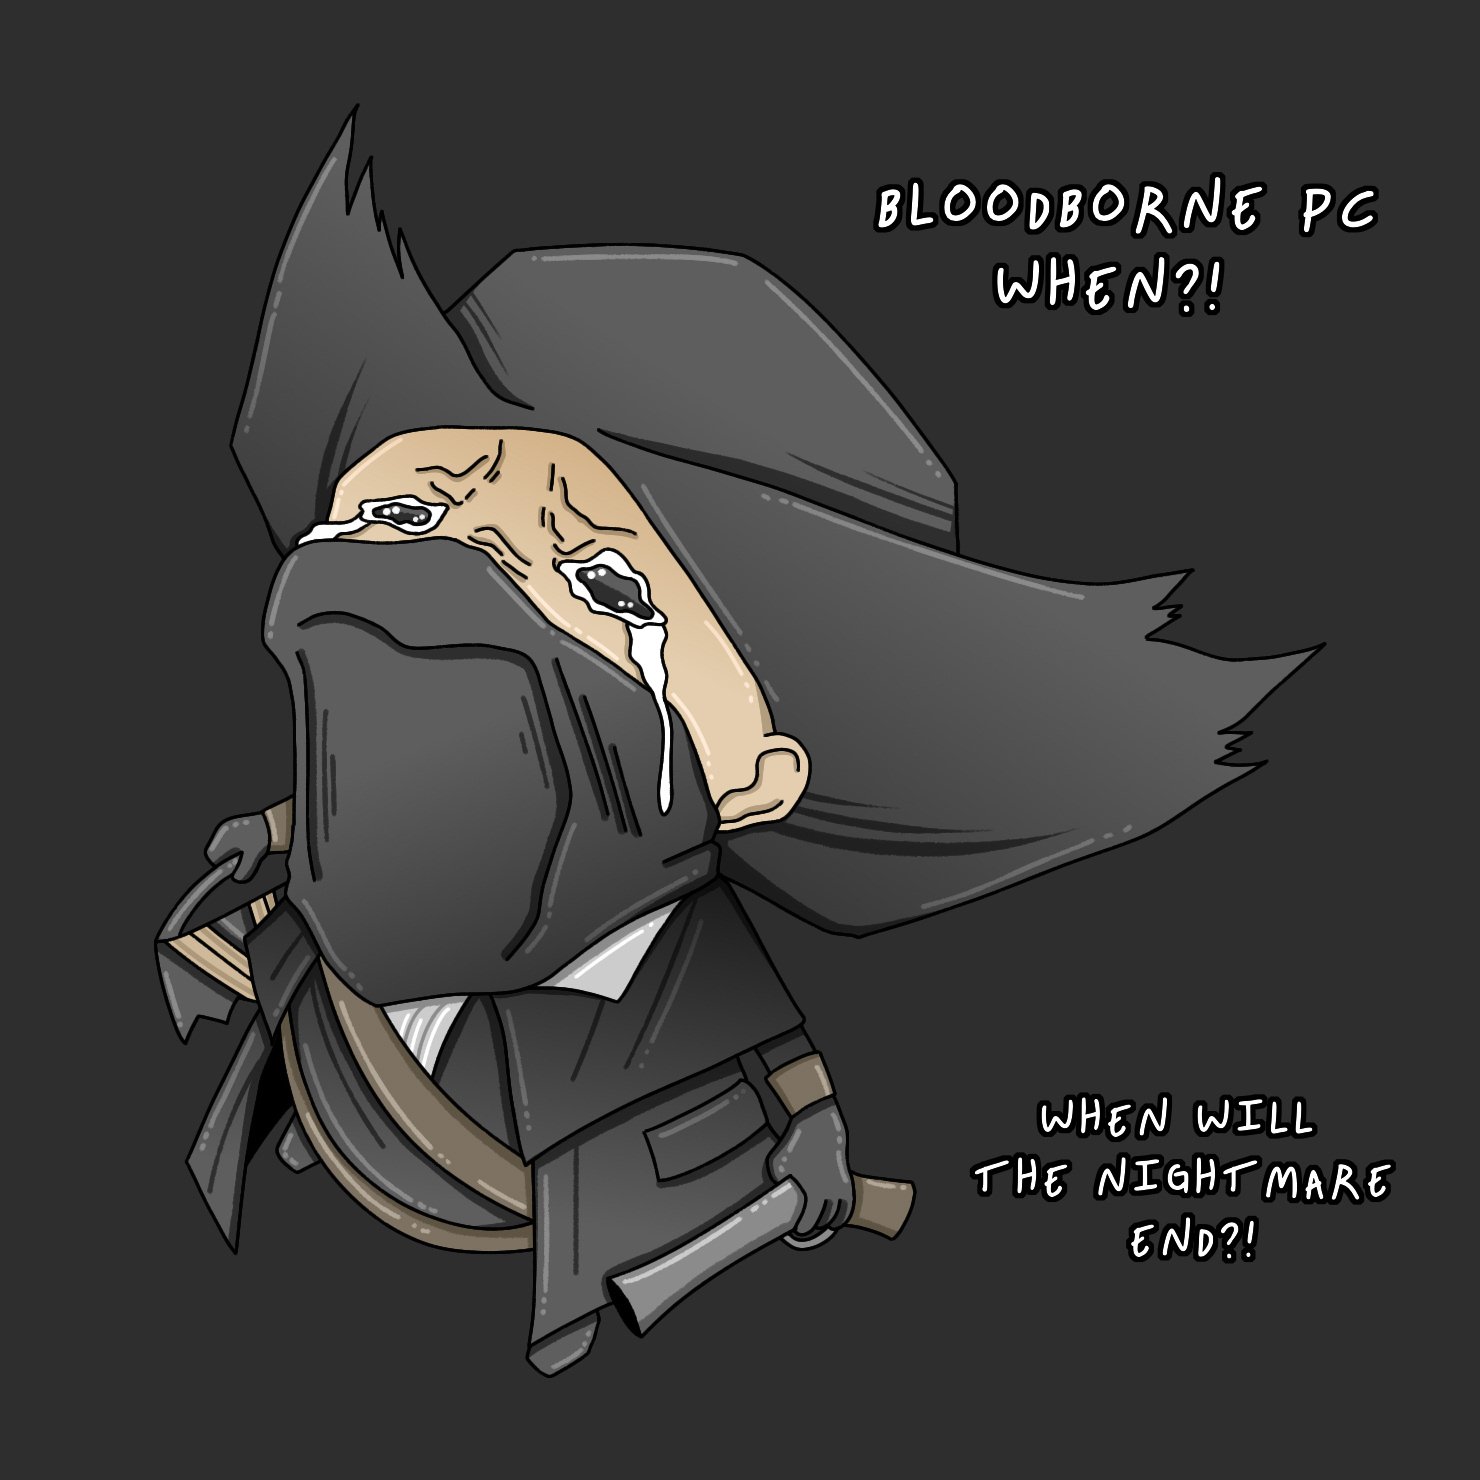 🌌 𝕁𝕆𝕎𝔸ℕ - Comms OPEN 🌌 on X: MOM! SONY DELETED THE POST ABOUT THAT  BLURRY BLOODBORNE PICTURE!!! #Bloodborne  / X